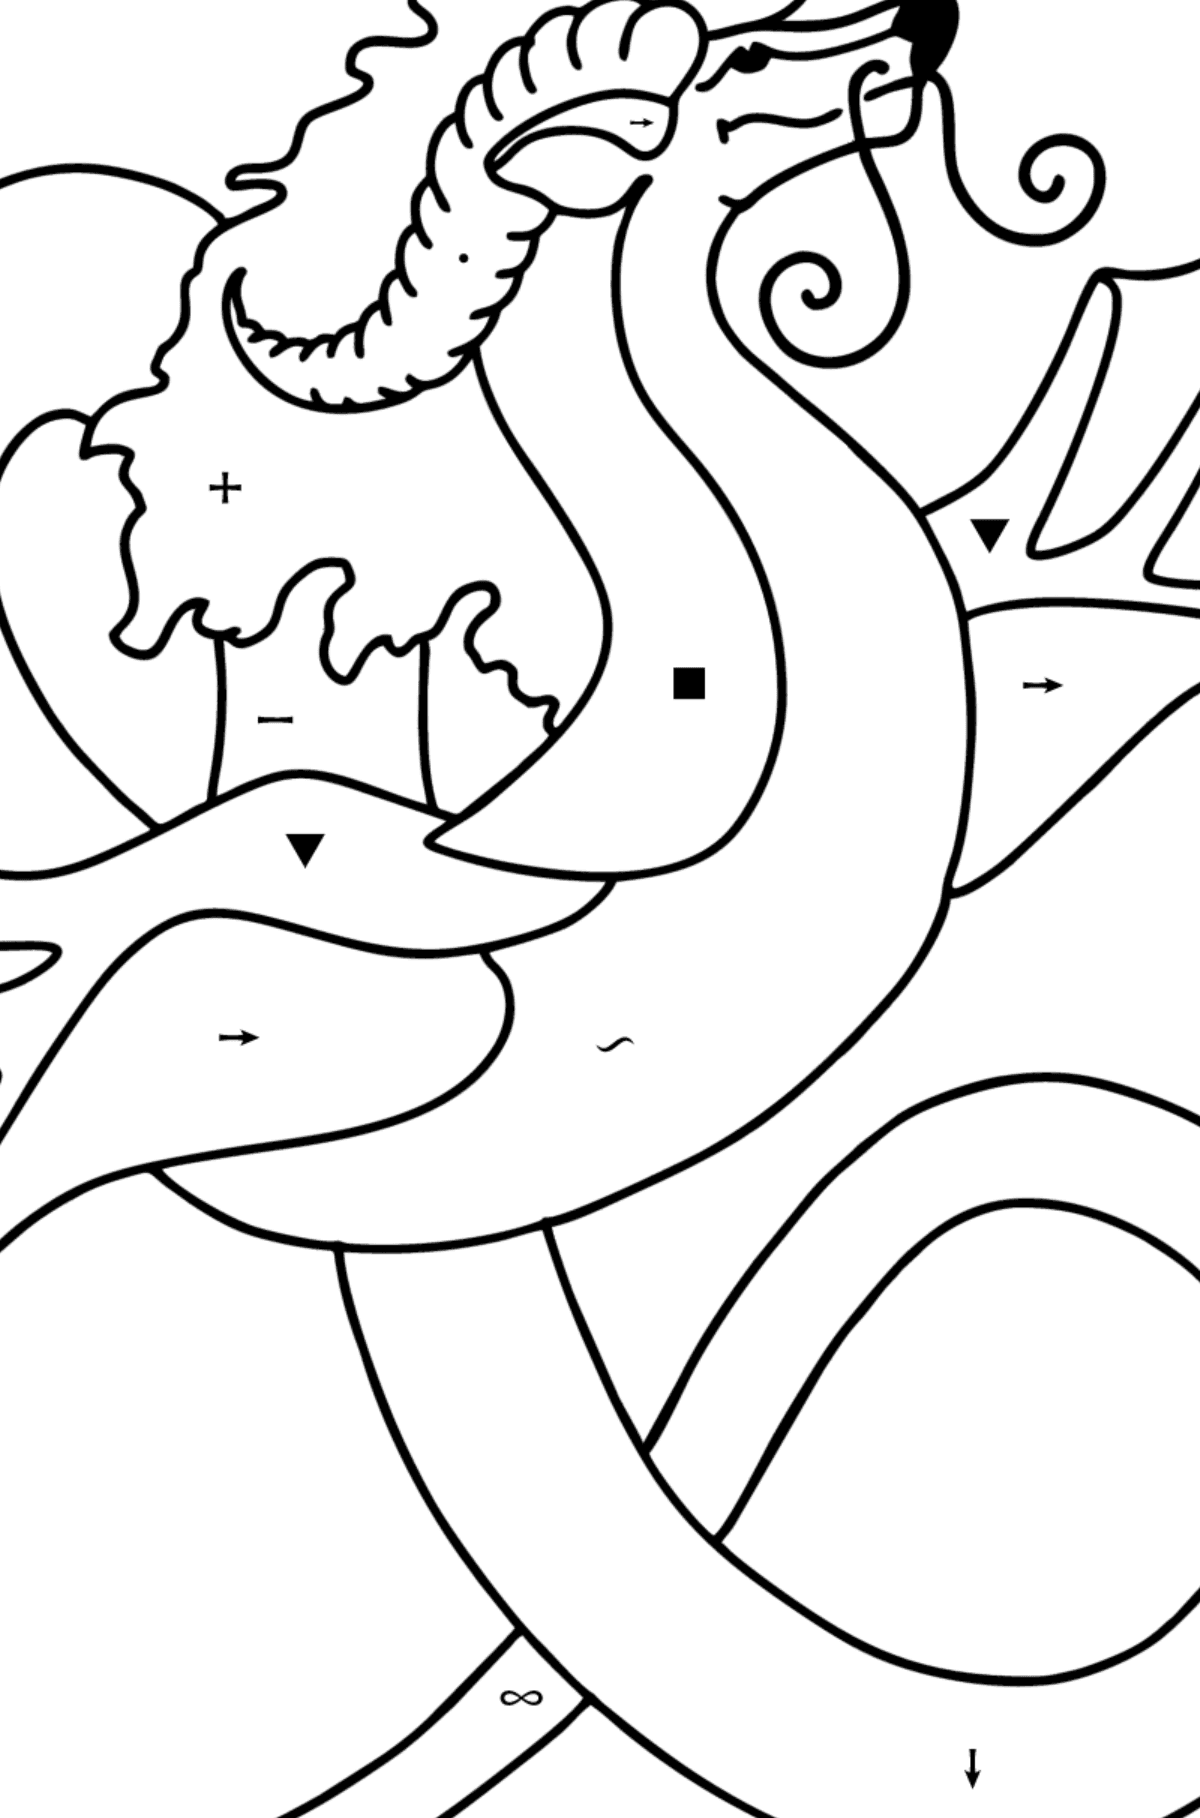 Flying Dragon coloring page - Coloring by Symbols for Kids